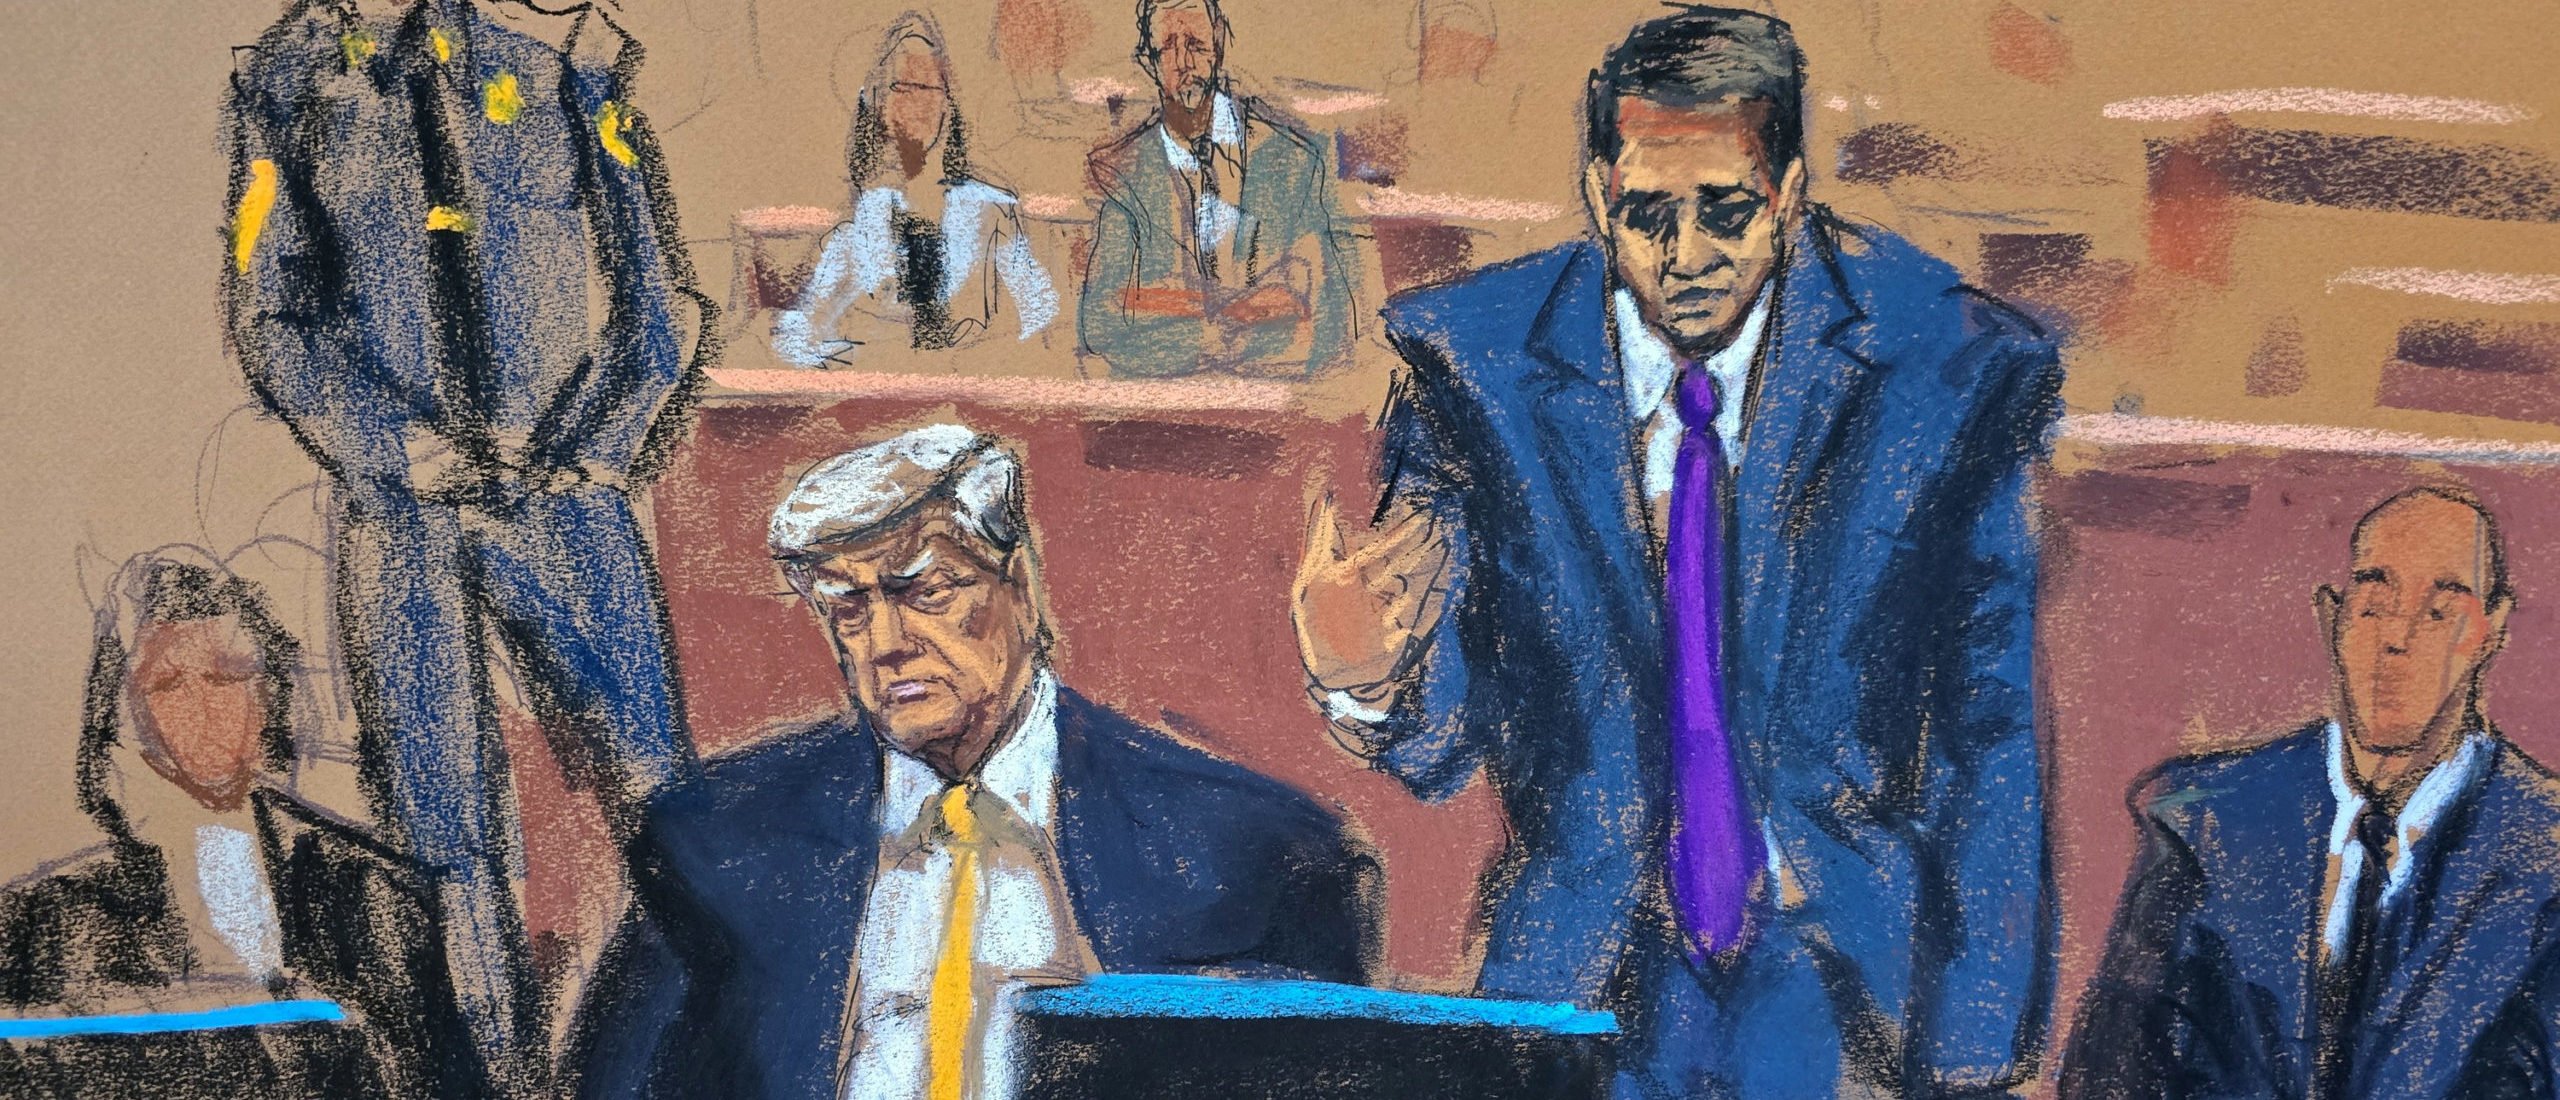 Republican presidential candidate and former U.S. President Donald Trump listens as his attorney Todd Blanche requests mistrial after Stormy Daniels direct testimony during Trump's criminal trial on charges that he falsified business records to conceal money paid to silence porn star Stormy Daniels in 2016, in Manhattan state court in New York City, U.S. May 7, 2024 in this courtroom sketch. REUTERS/Jane Rosenberg